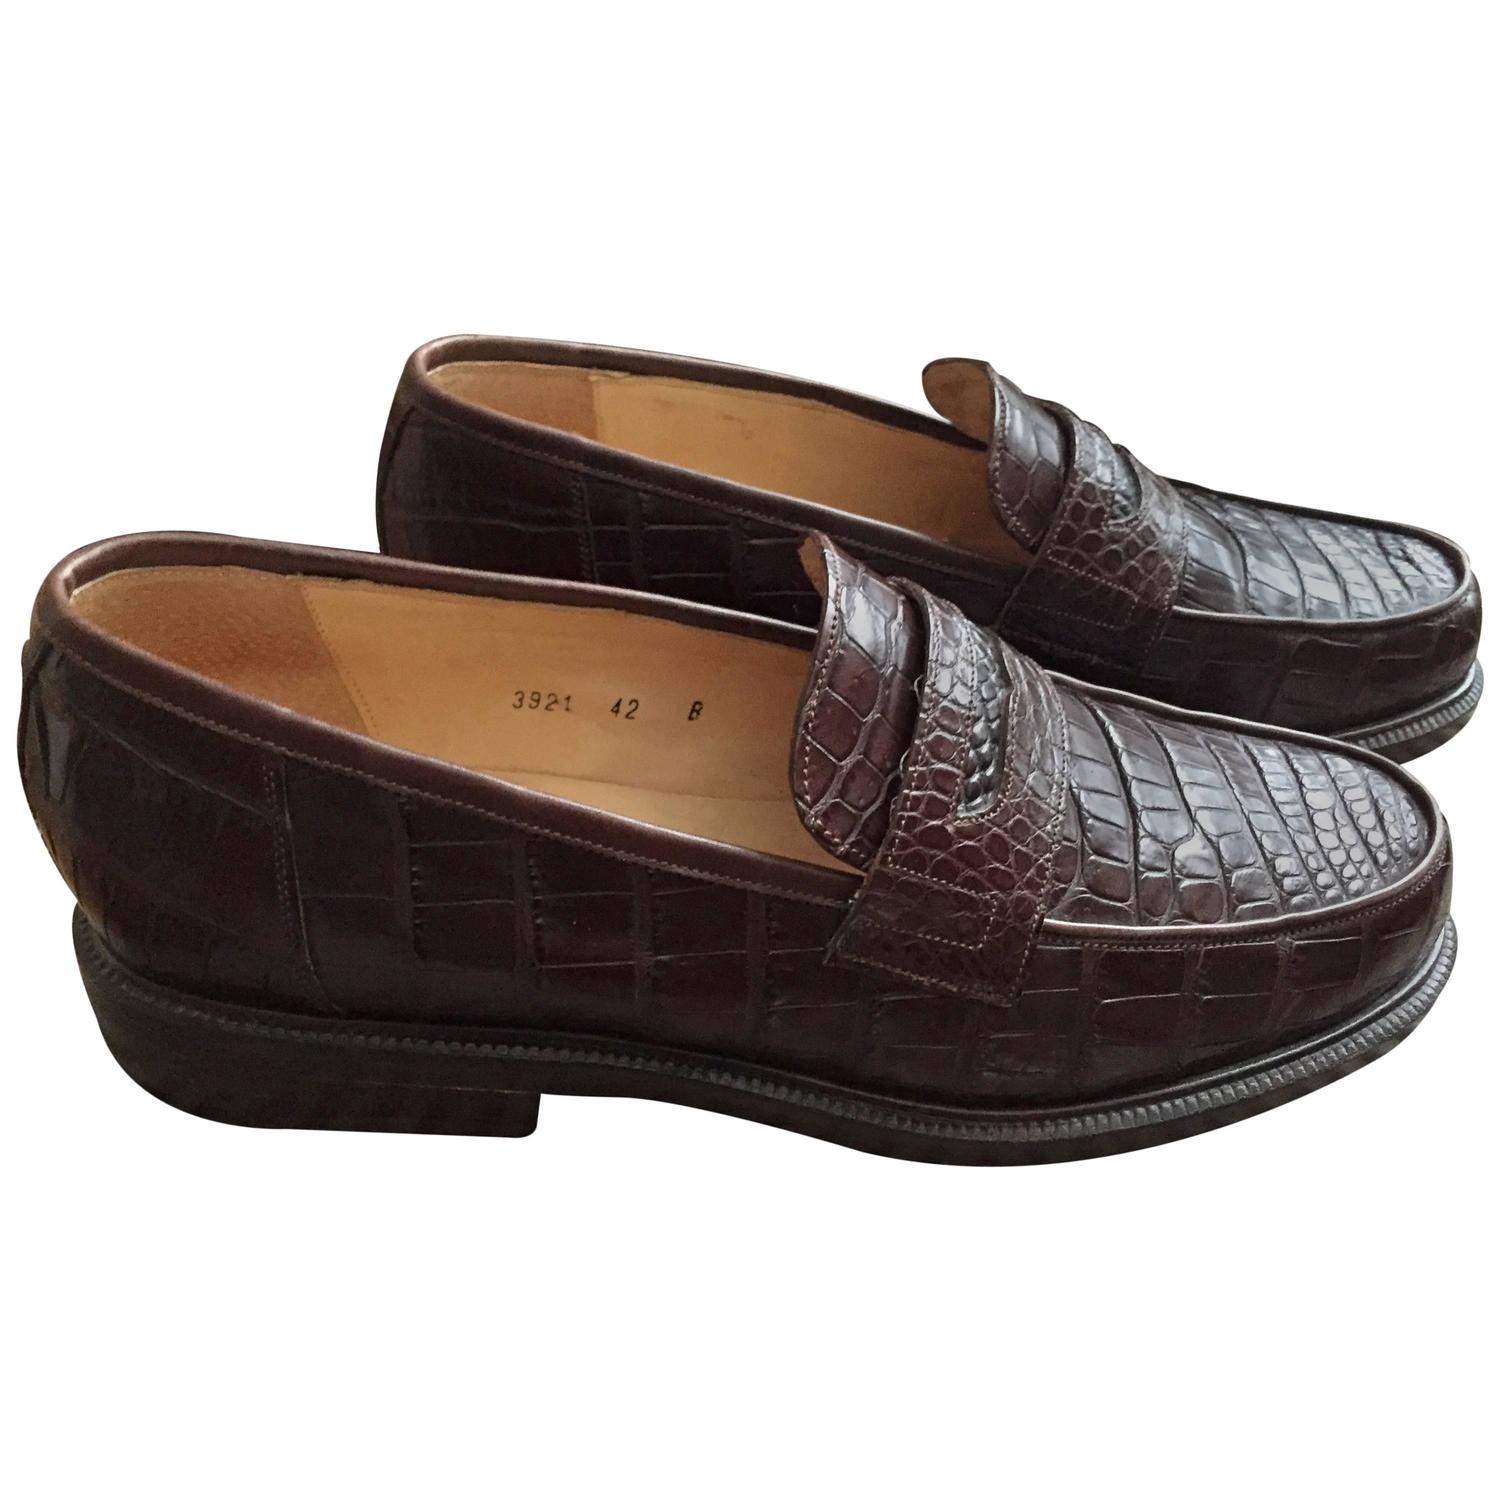 Sartore Paris Mens Brown Alligator Penny Loafers For Sale at 1stdibs